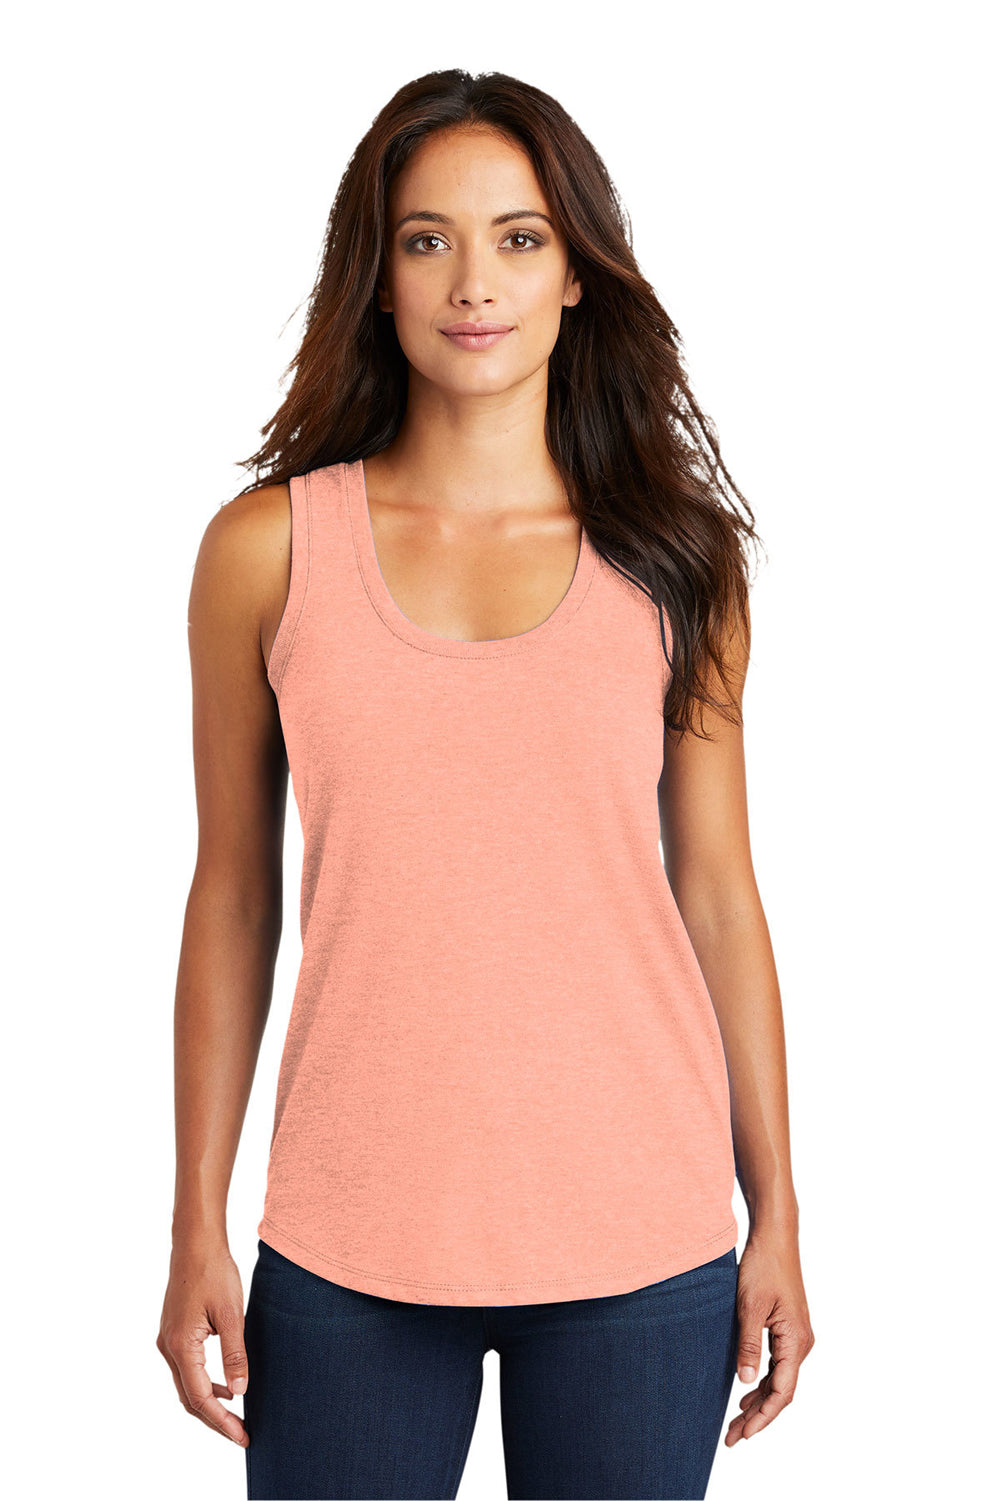 District DM138L Womens Perfect Tri Tank Top Heather Dusty Peach Front